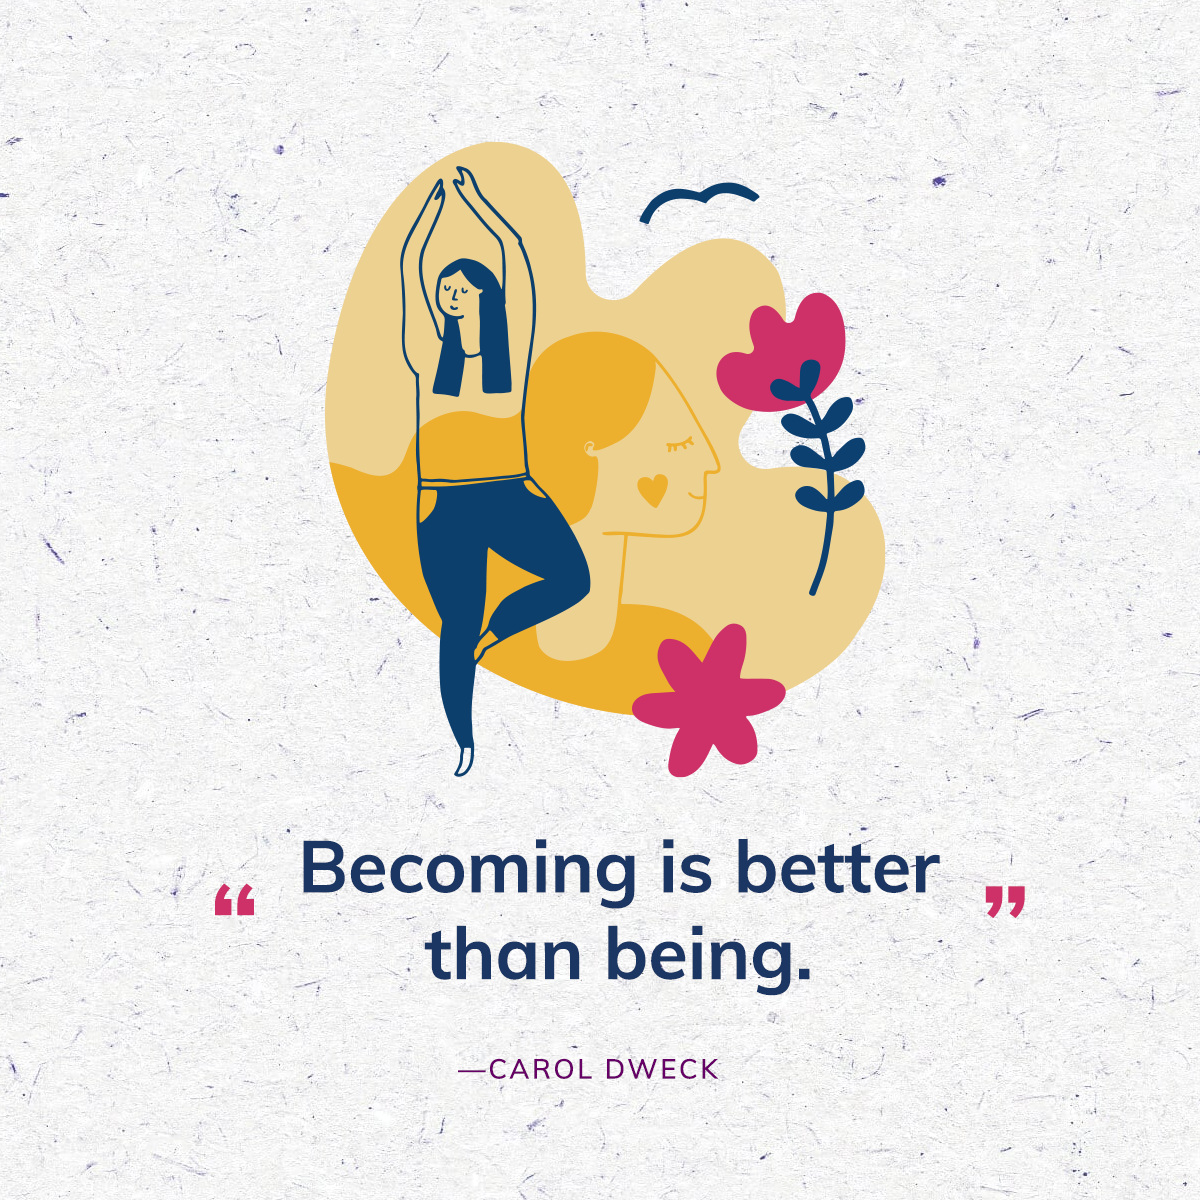 Carol Dweck's Quote